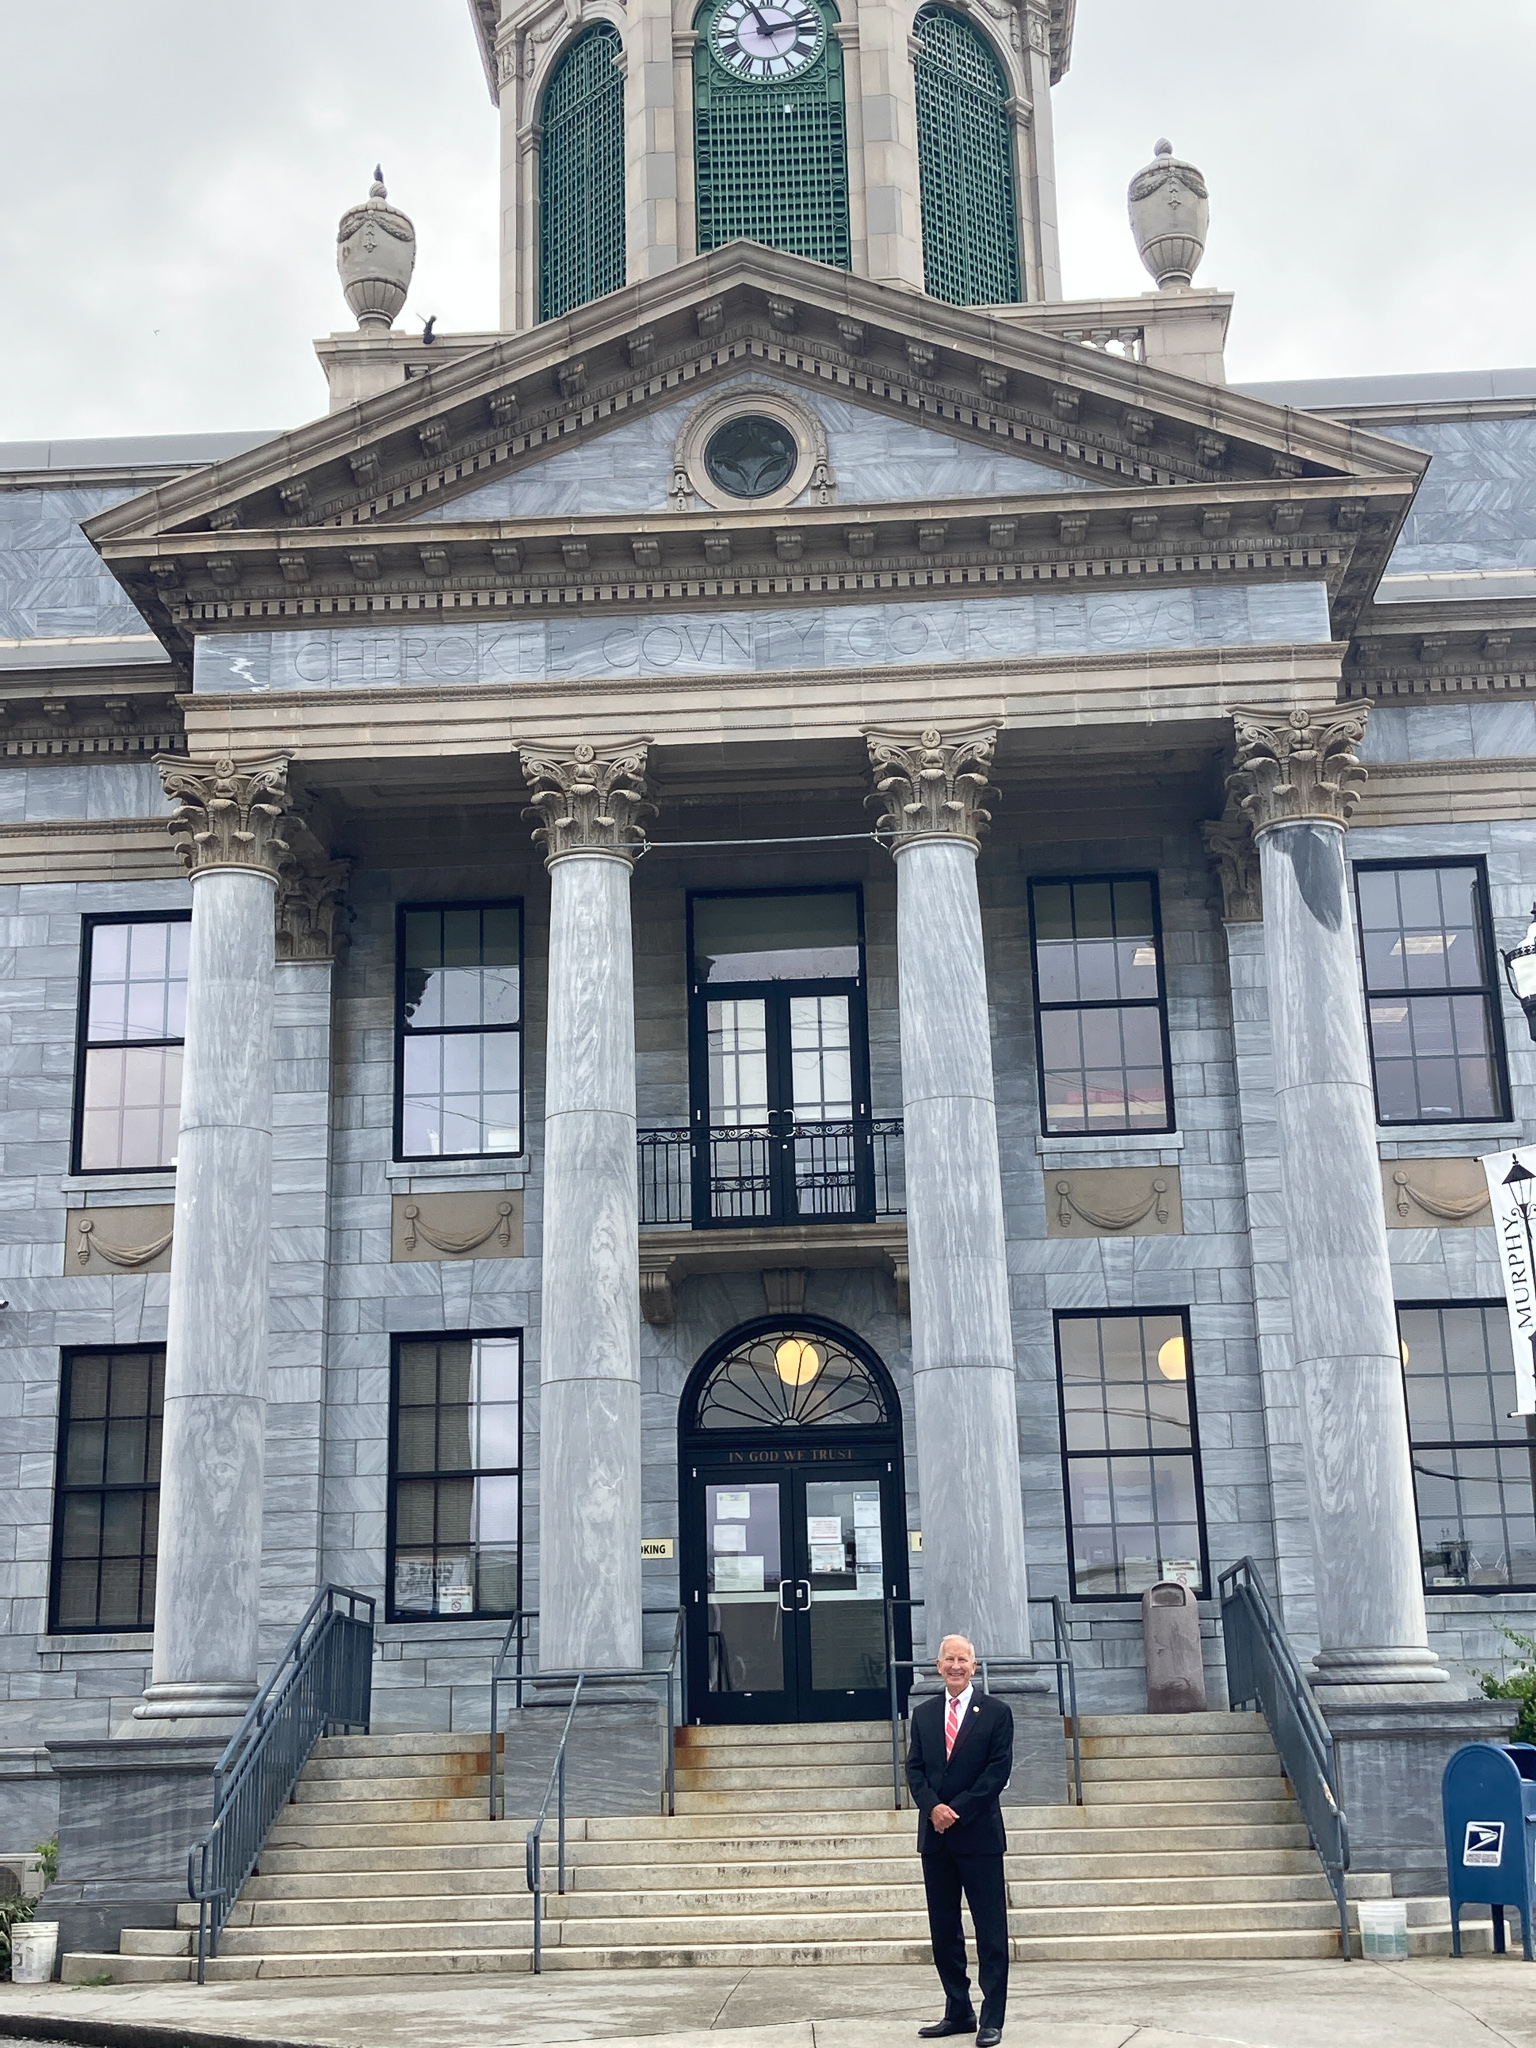 Chief Justice Paul Newby in front of the Cherokee County Courthouse in Murphy, NC